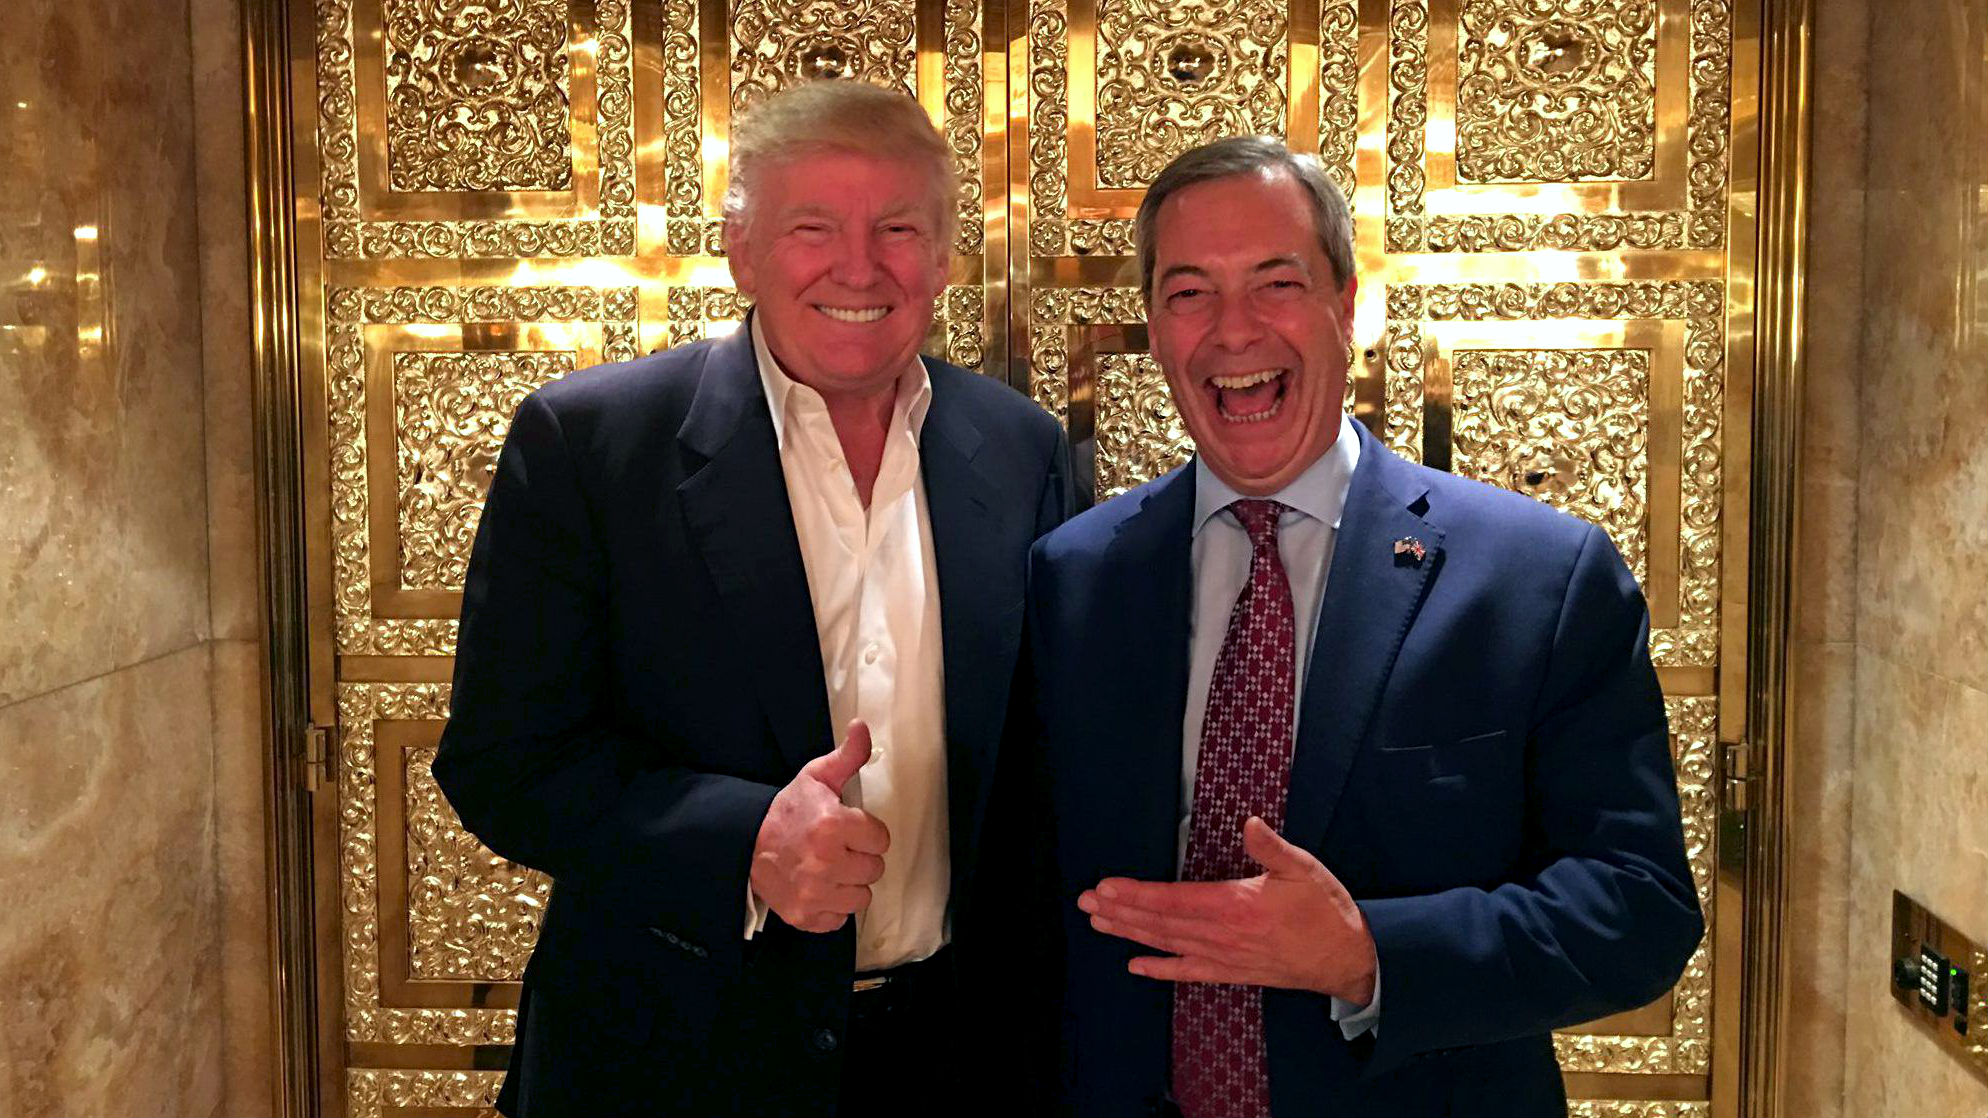 Ukip&#039;s Nigel Farage and US president-elect Donald Trump pose for a photo, days after the US election in November